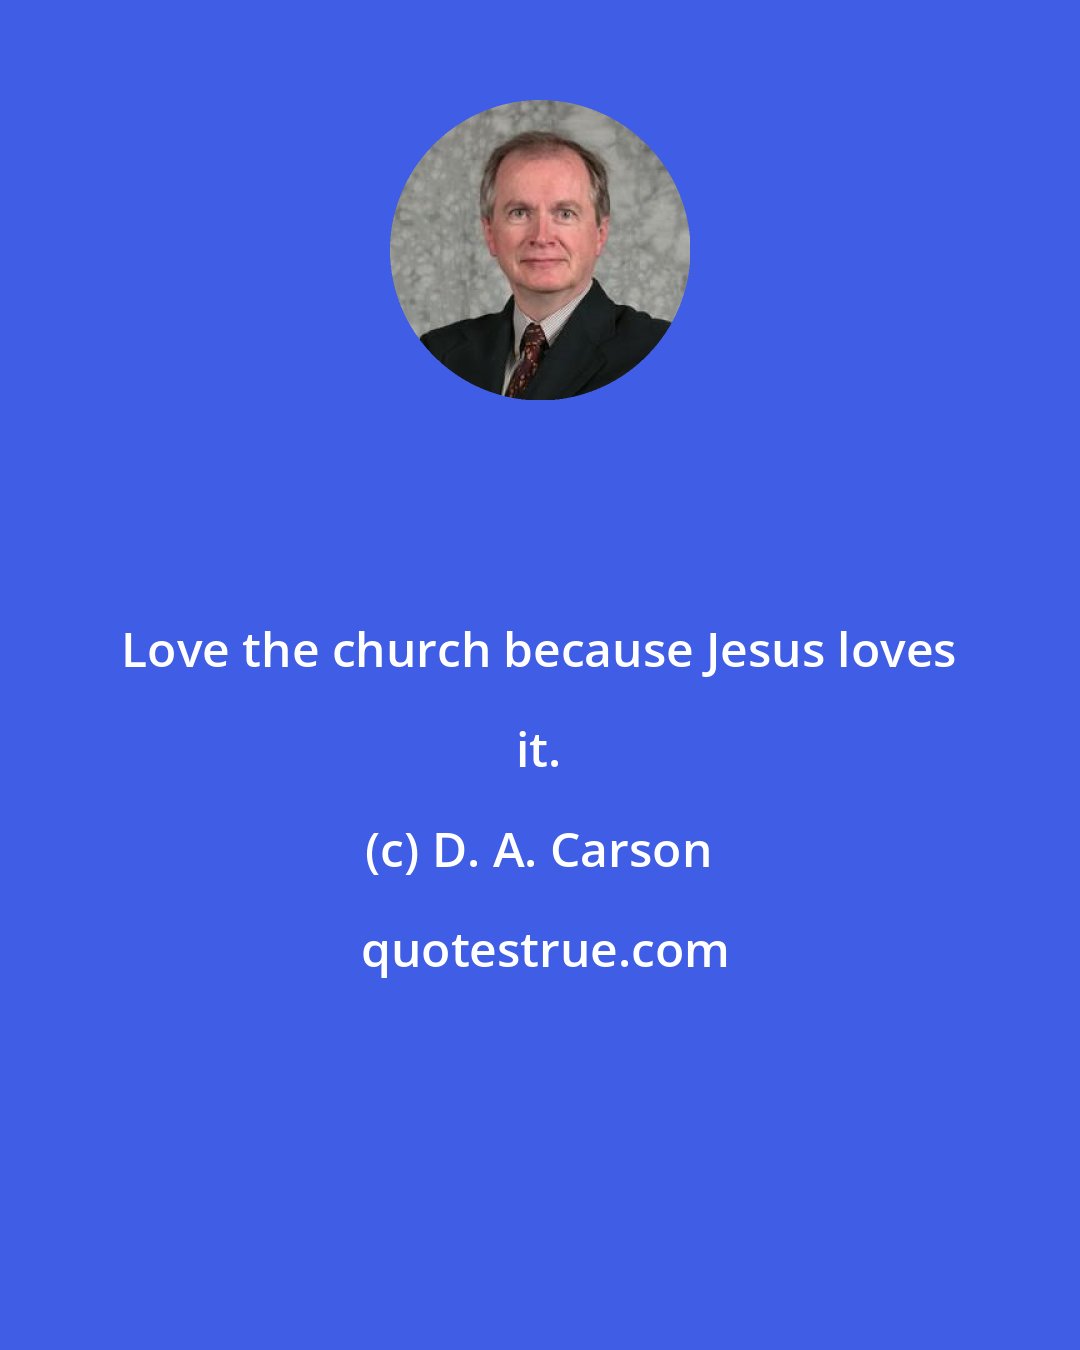 D. A. Carson: Love the church because Jesus loves it.